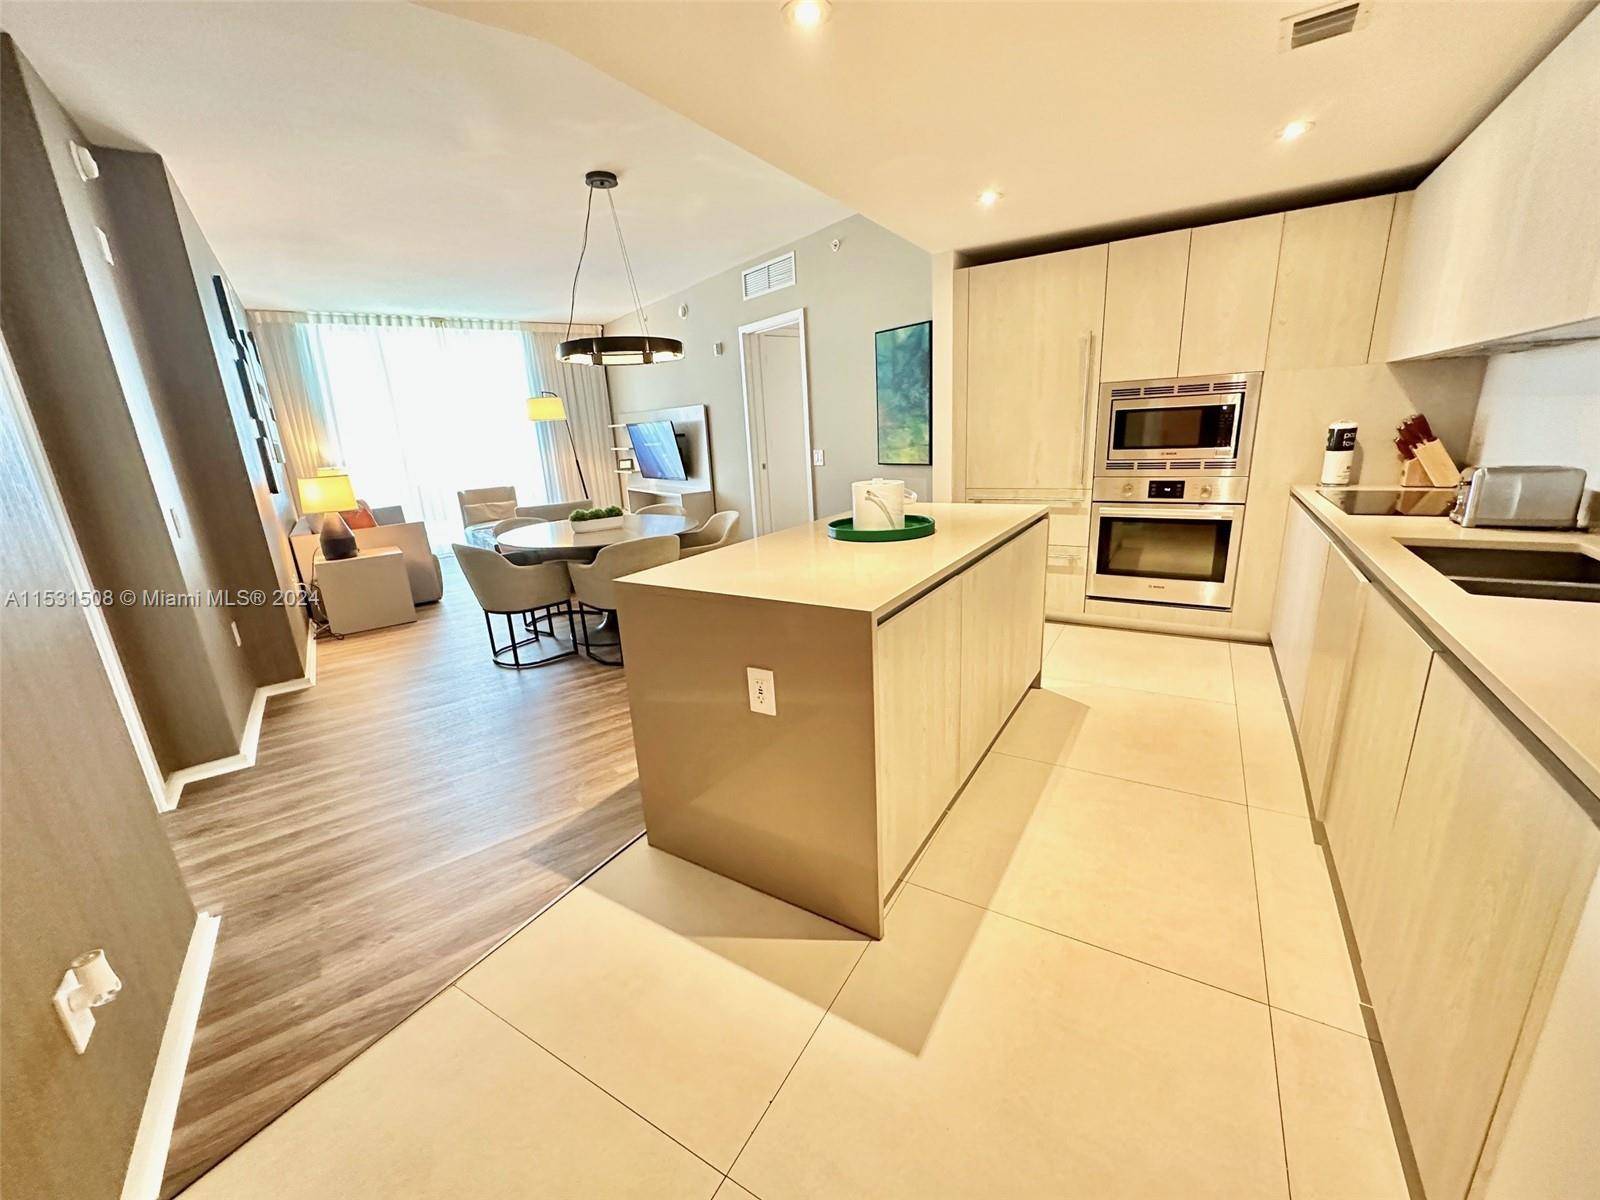 Experience luxury living in this Stunning 2 bedroom, 2 bathroom apartment in the prestigious HYDE BEACH RESORT RESIDENCES.